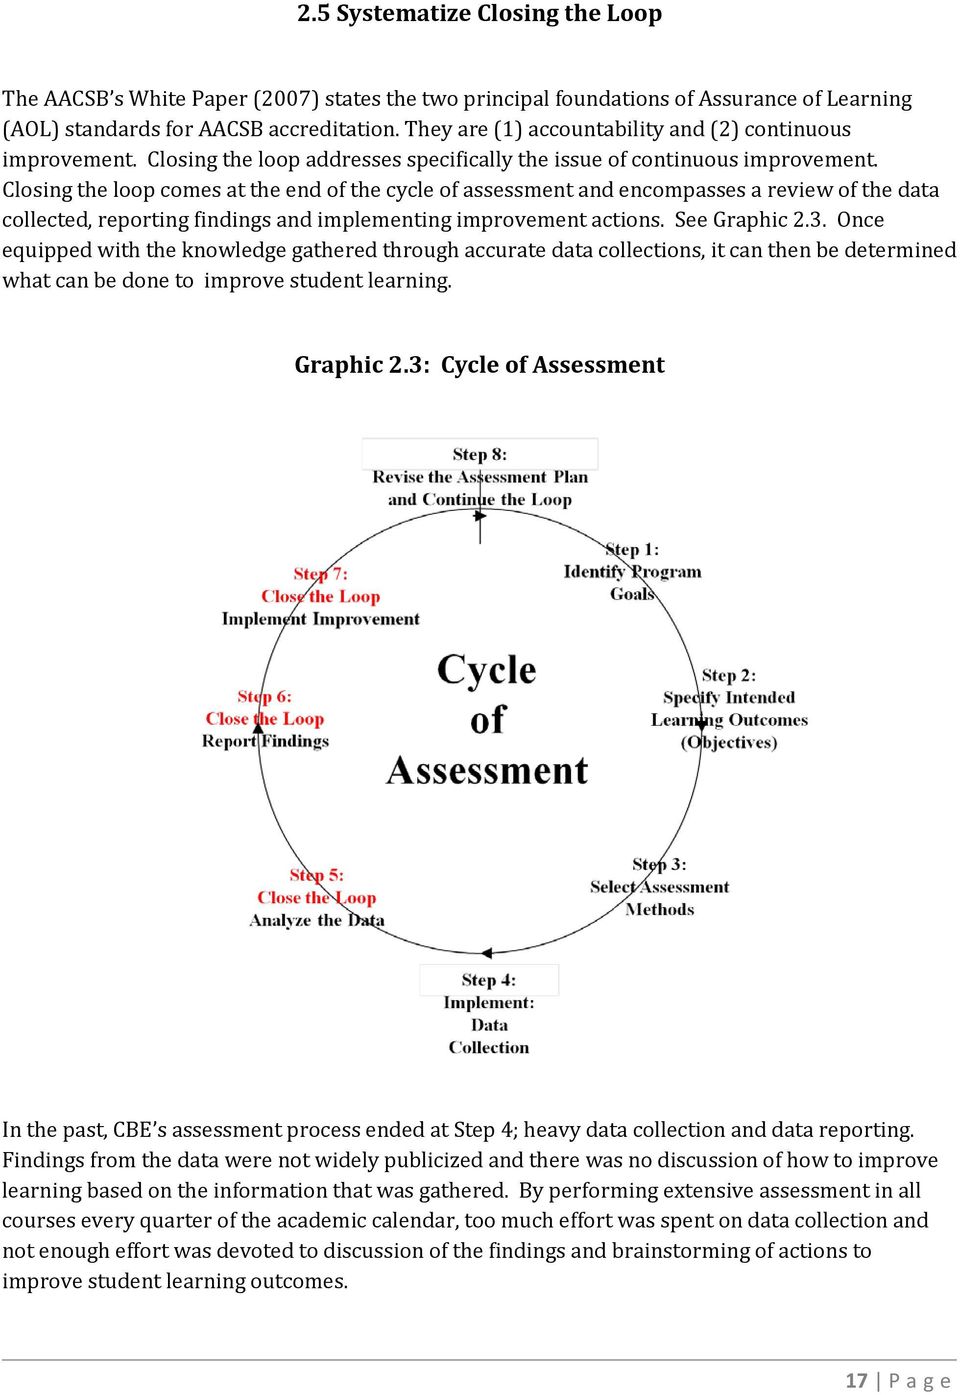 Closing the loop comes at the end of the cycle of assessment and encompasses a review of the data collected, reporting findings and implementing improvement actions. See Graphic 2.3.